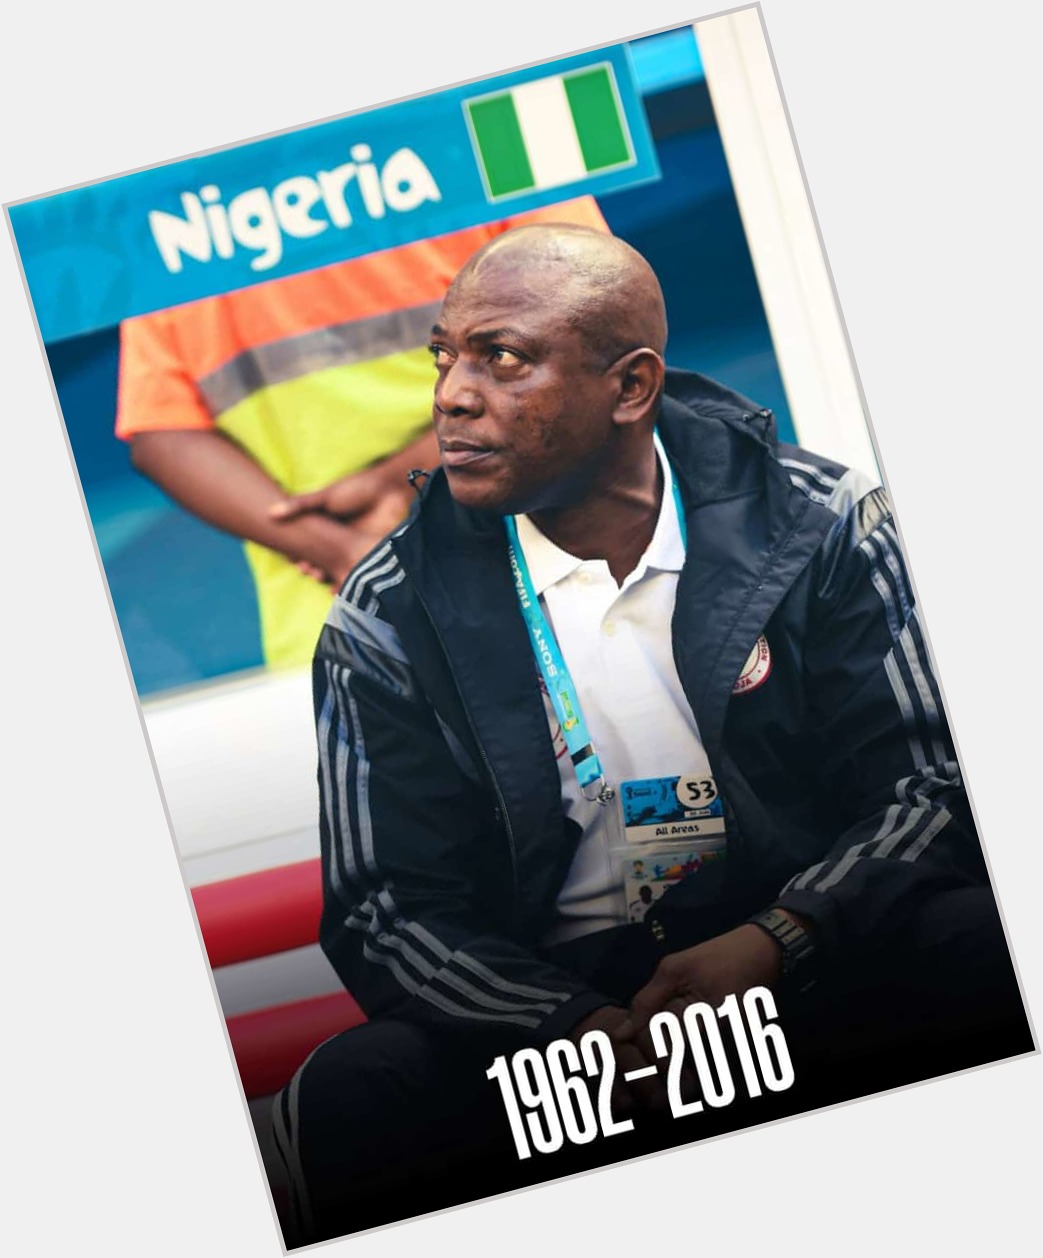 Happy Posthumous Birthday to Stephen Keshi, a great Super Eagles boss  Rest on   Abia State  